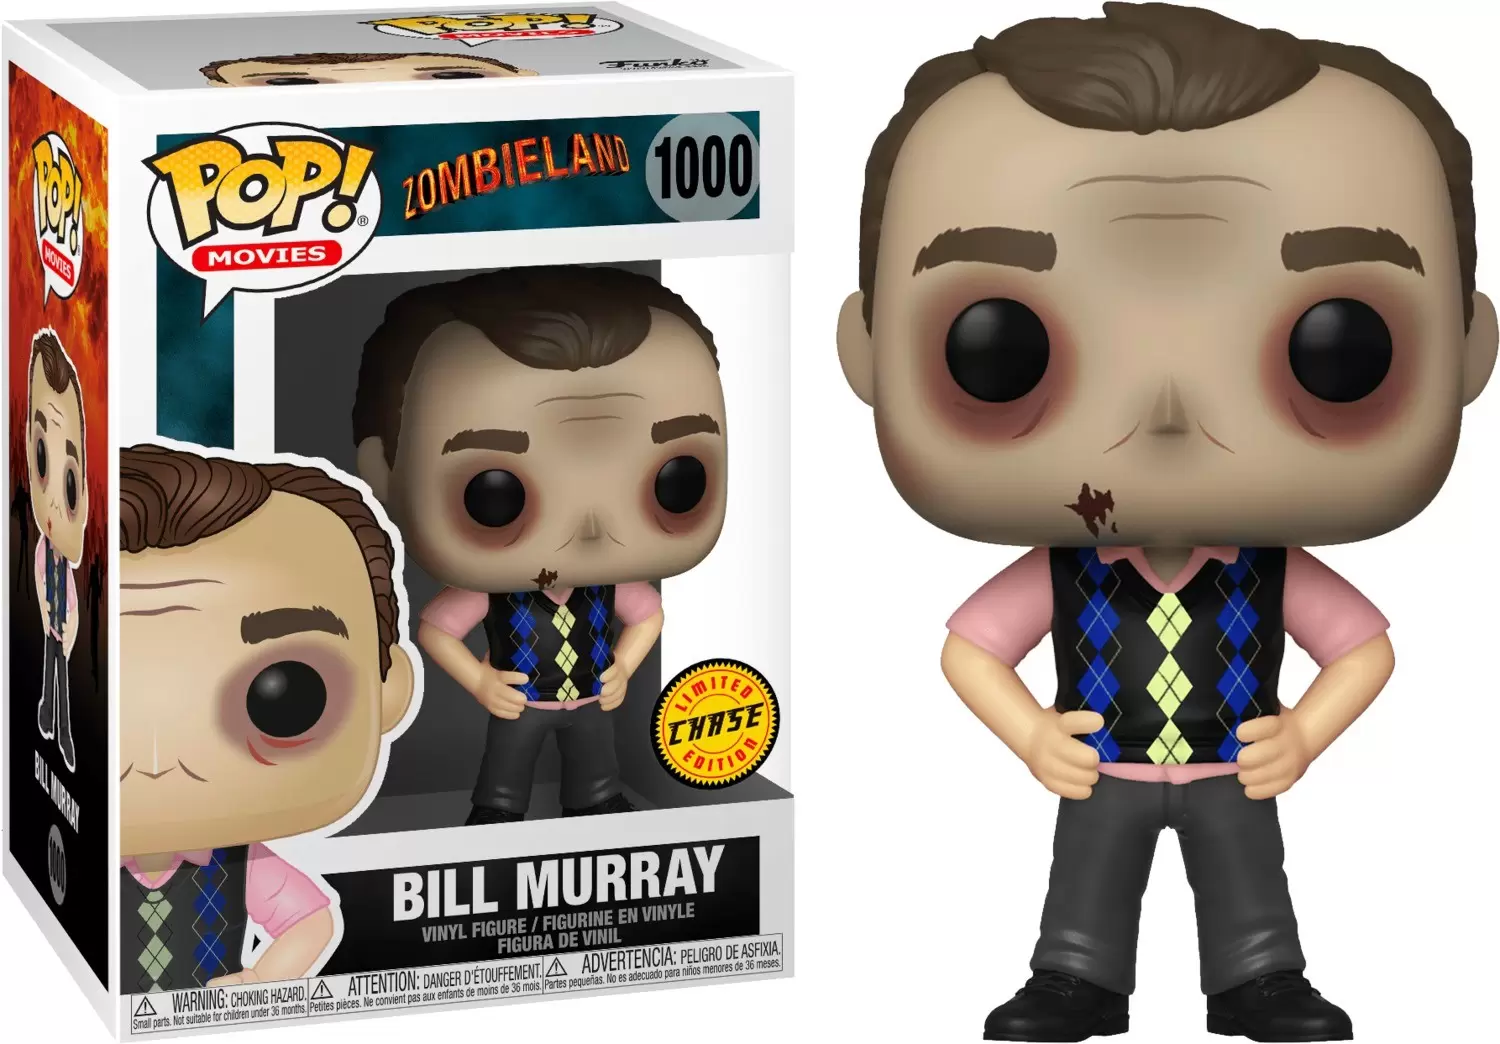 POP! Movies - Zombieland - Bill Murray Chase